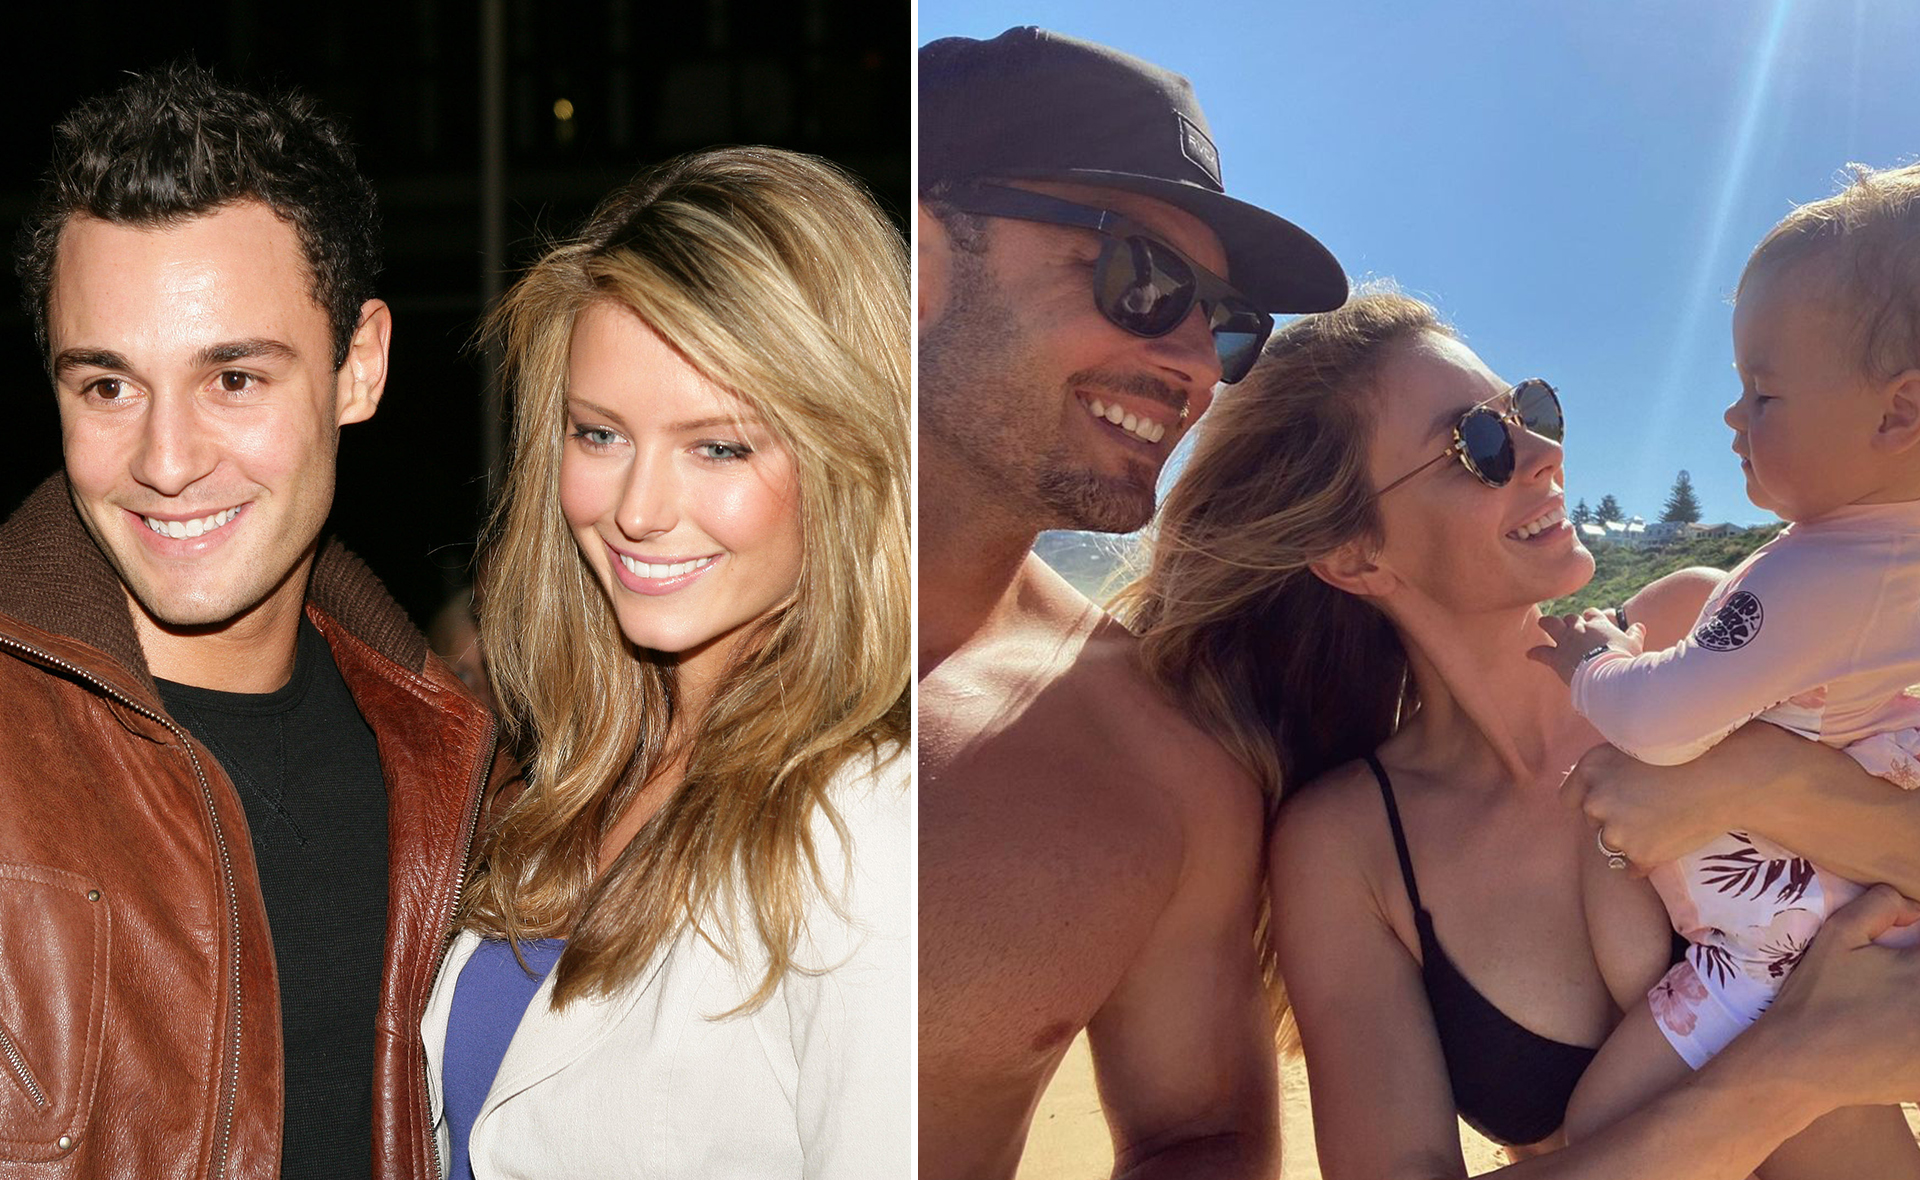 “We’ve grown up so much”: Jennifer Hawkins and Jake Wall’s decades-long love story